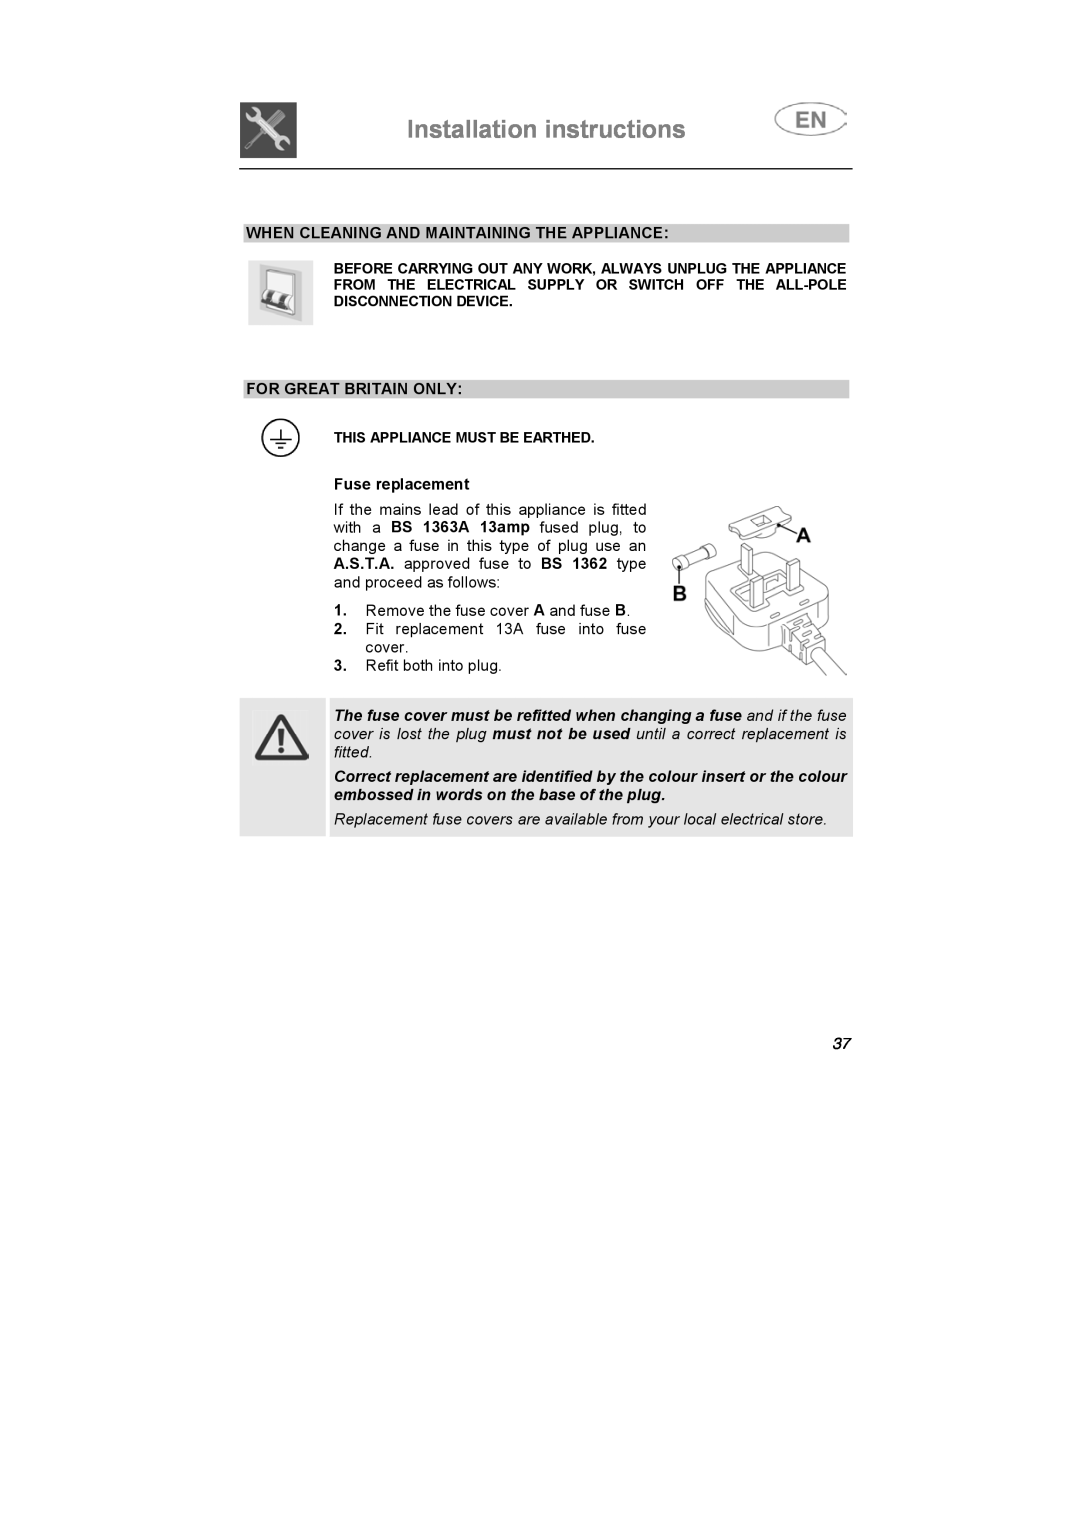 Smeg LSA653E Installation instructions, When Cleaning And Maintaining The Appliance, For Great Britain Only 